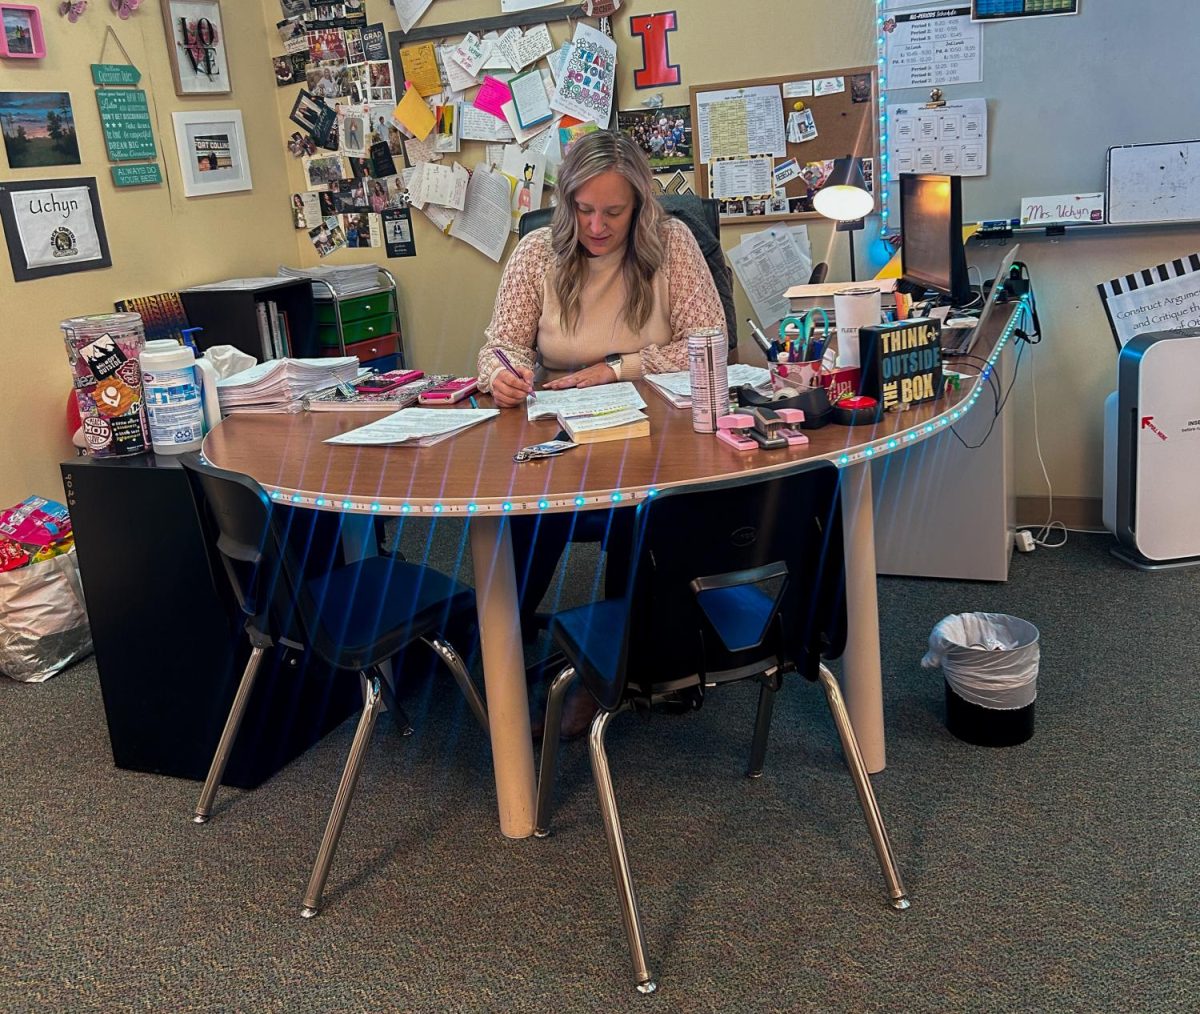 Rebecca Uchyn sits at her desk as she grades student work during seventh period AP Statistics Nov. 9. When she’s not up at the board teaching her class, Uchyn spends most of her time at her desk, where she is surrounded by decorations and lights. “I think a workspace is defined by the people in it. At Rock Canyon, the staff are incredibly dedicated to not just their students but also each other. We are supportive and encouraging through all the ups and downs of the school year. At the end of the day, work is work but being surrounded by really awesome people makes all the difference,” Uchyn said.